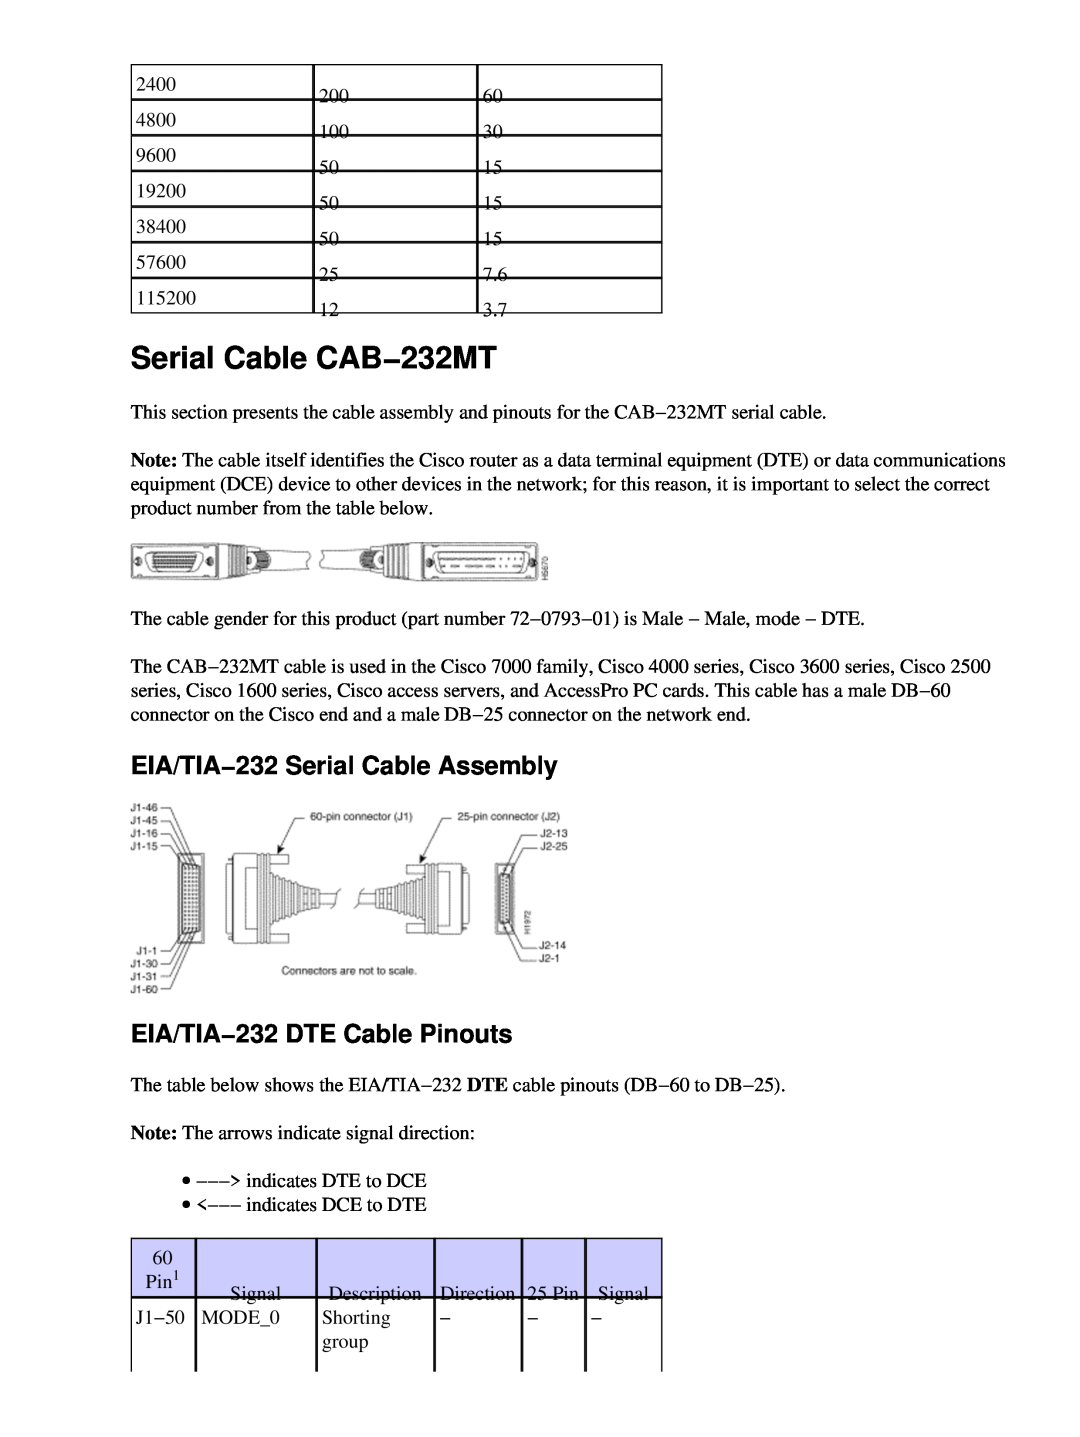 Cisco Systems CAB-232FC, CAB-232MT Serial Cable CAB−232MT, EIA/TIA−232 Serial Cable Assembly EIA/TIA−232 DTE Cable Pinouts 